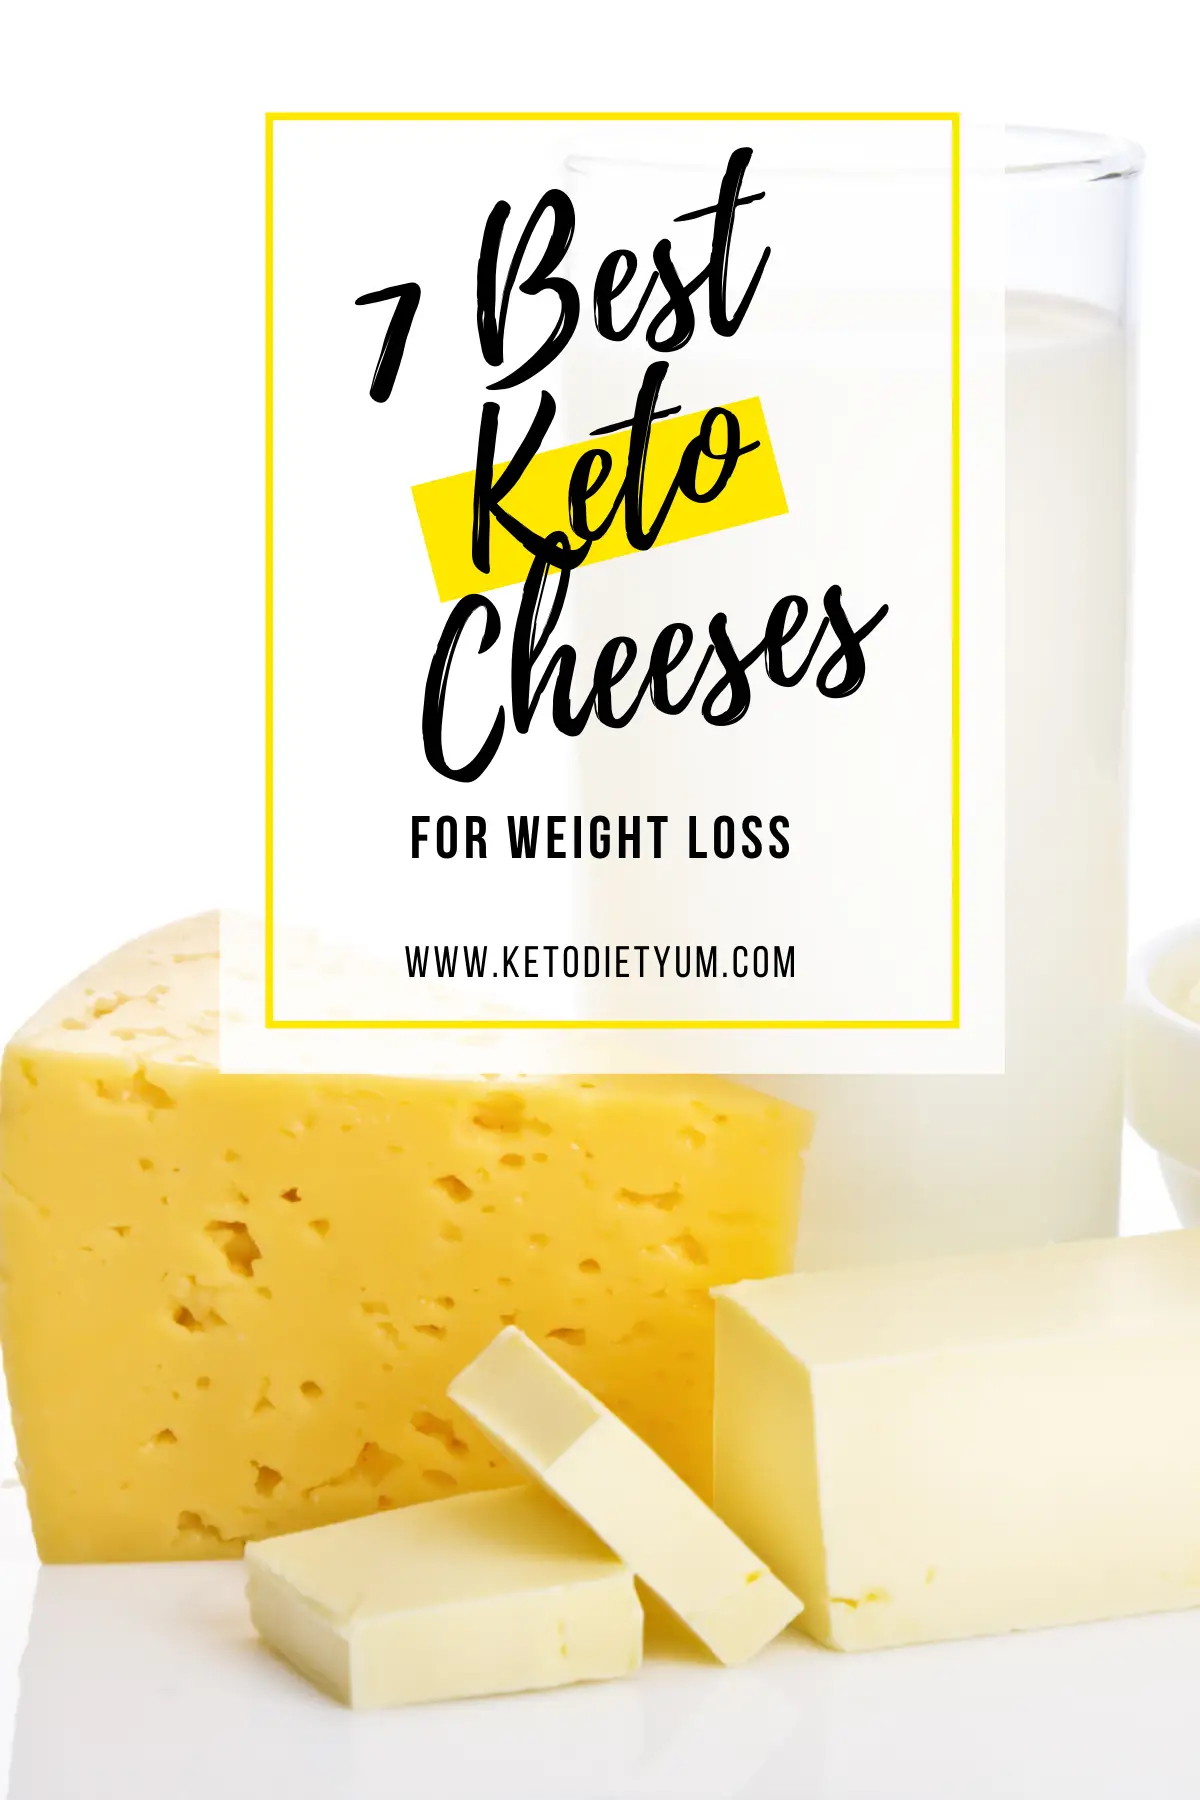 Keto Diet Cheese: 7 Best Types To Eat